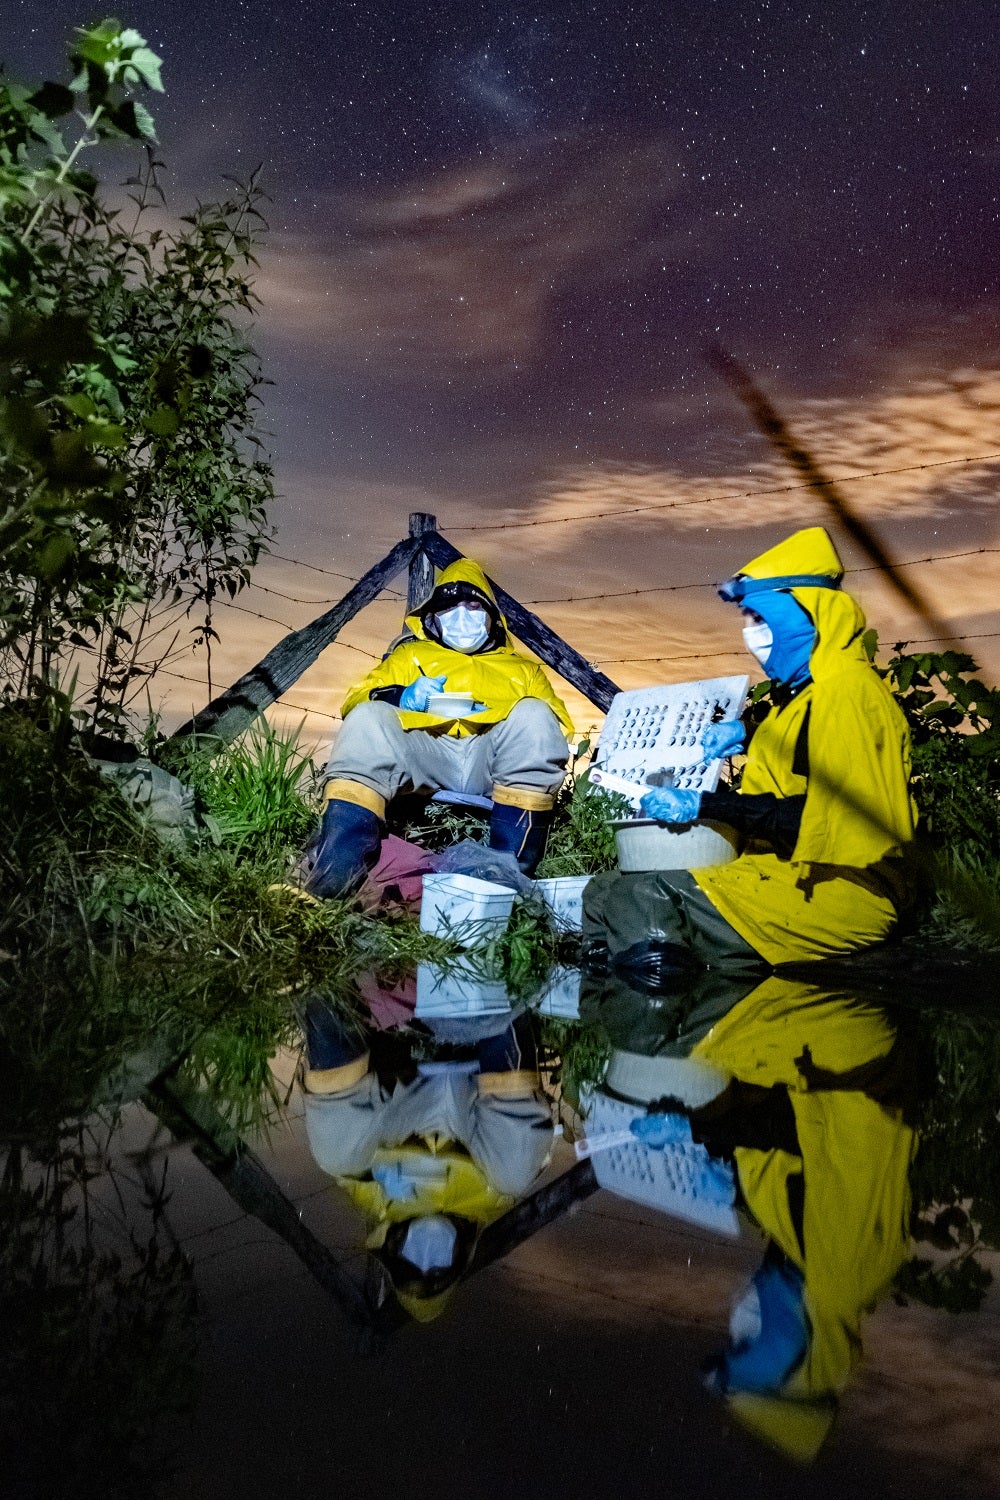 A researcher in a yellow protective suit and COVID PPE under the stars at night